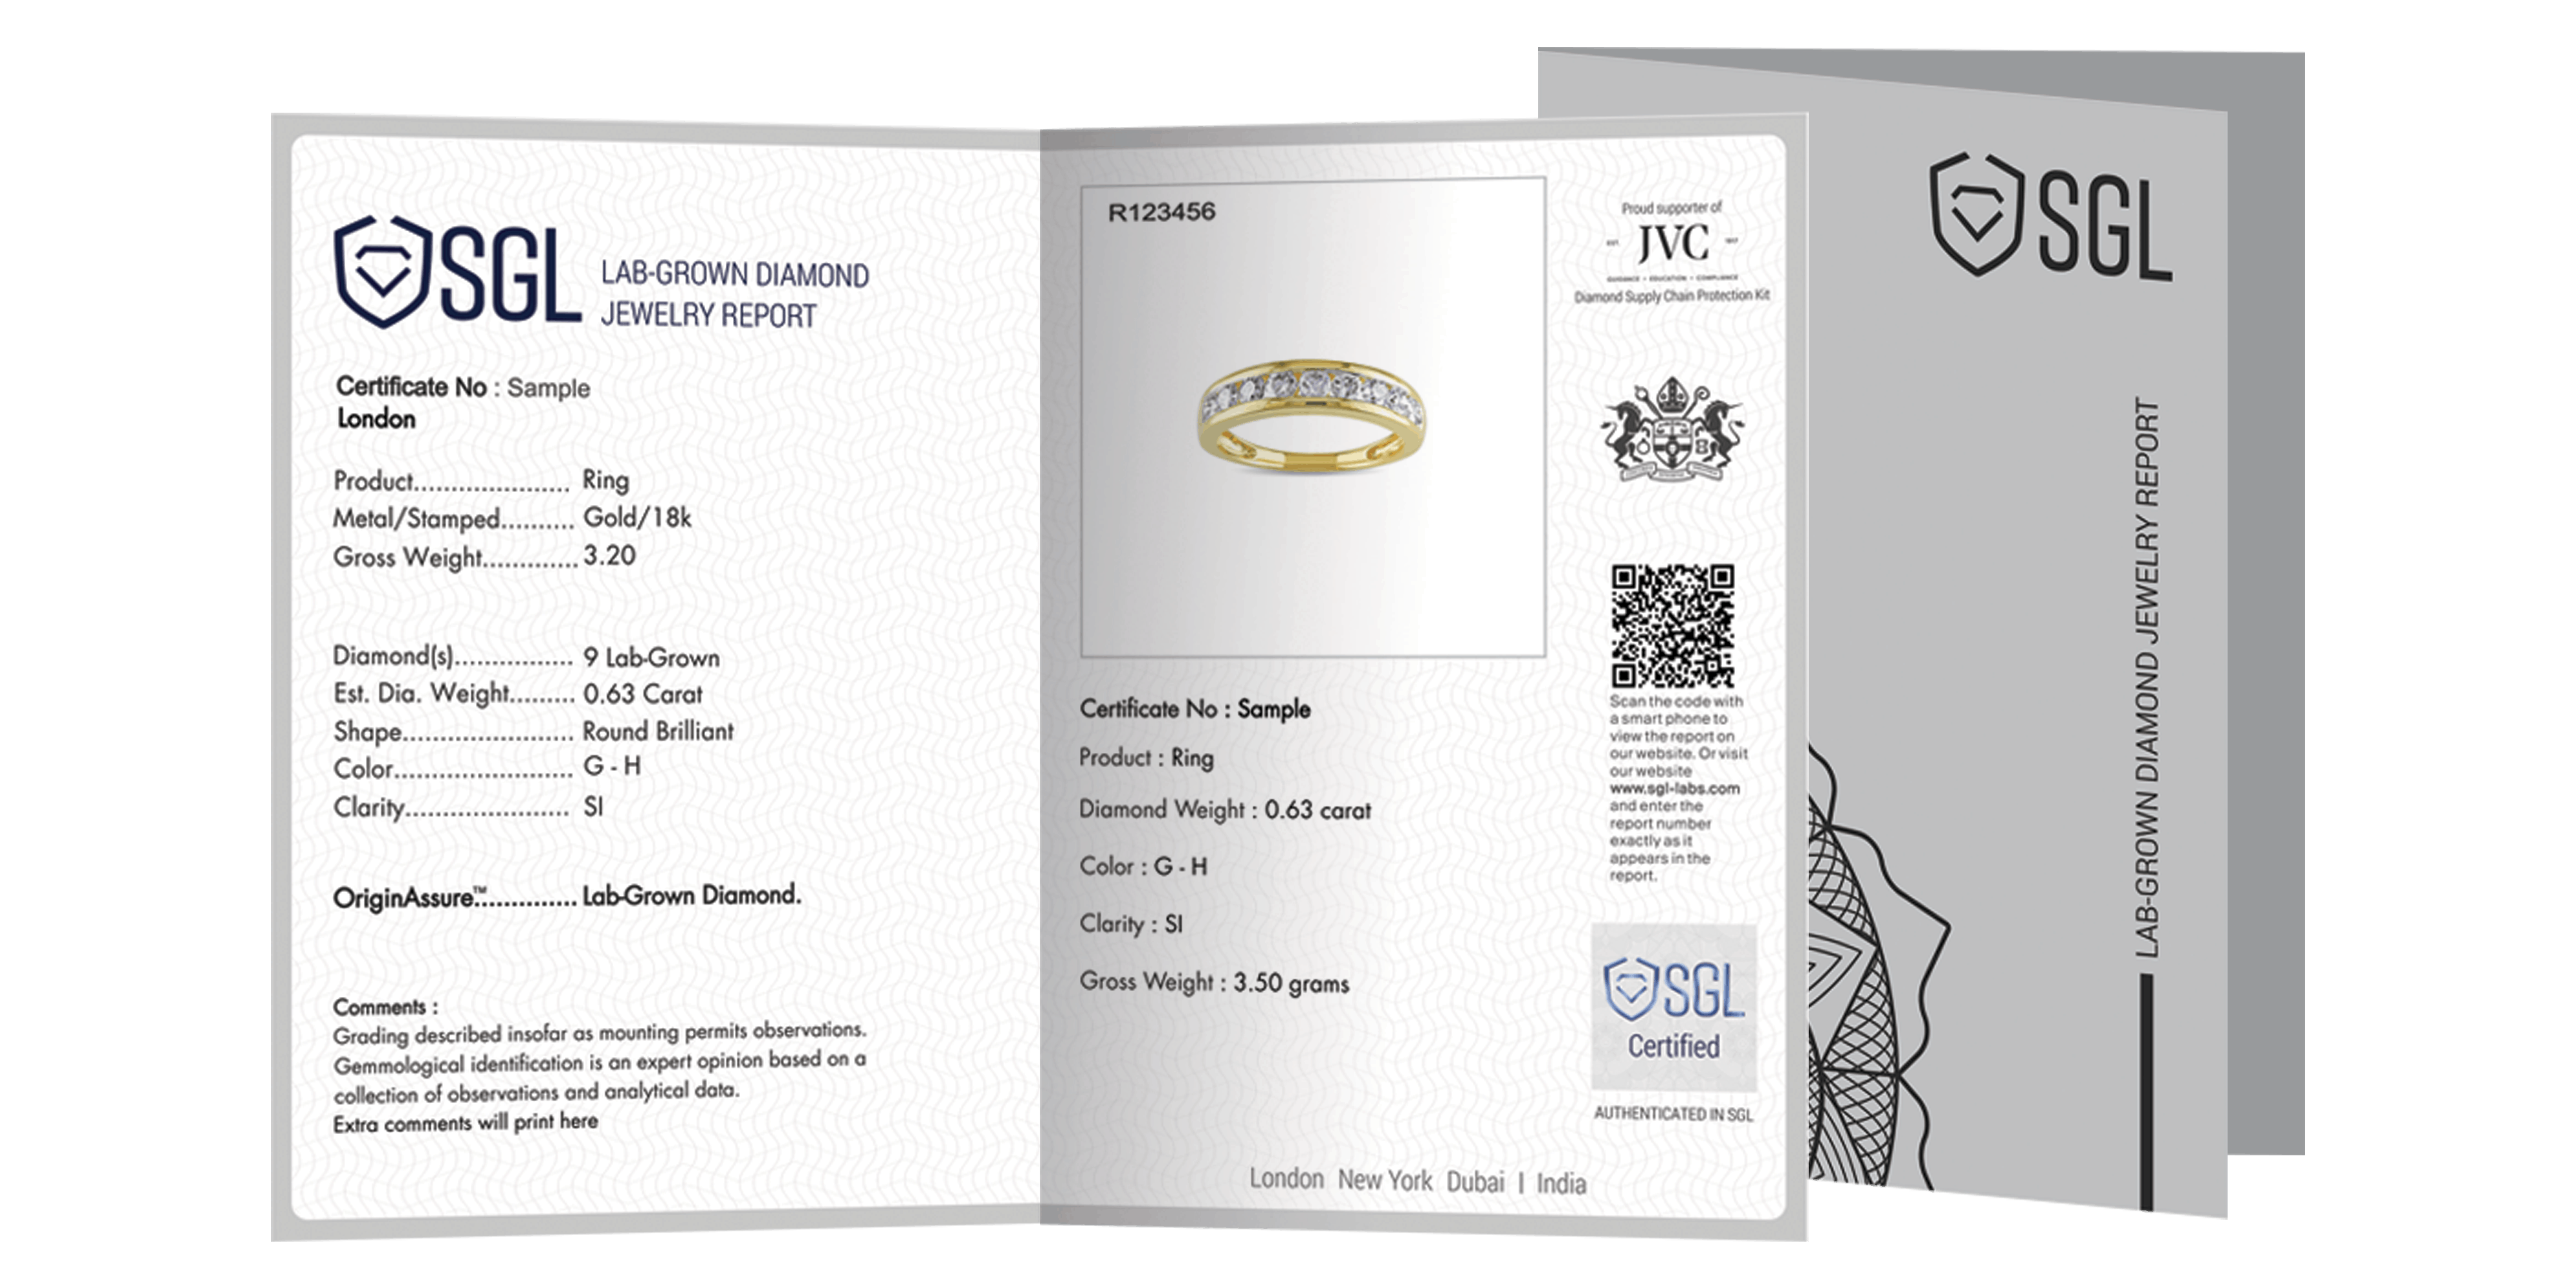 The image is of the lab grown diamond jewellery report which is being provided by SGL.